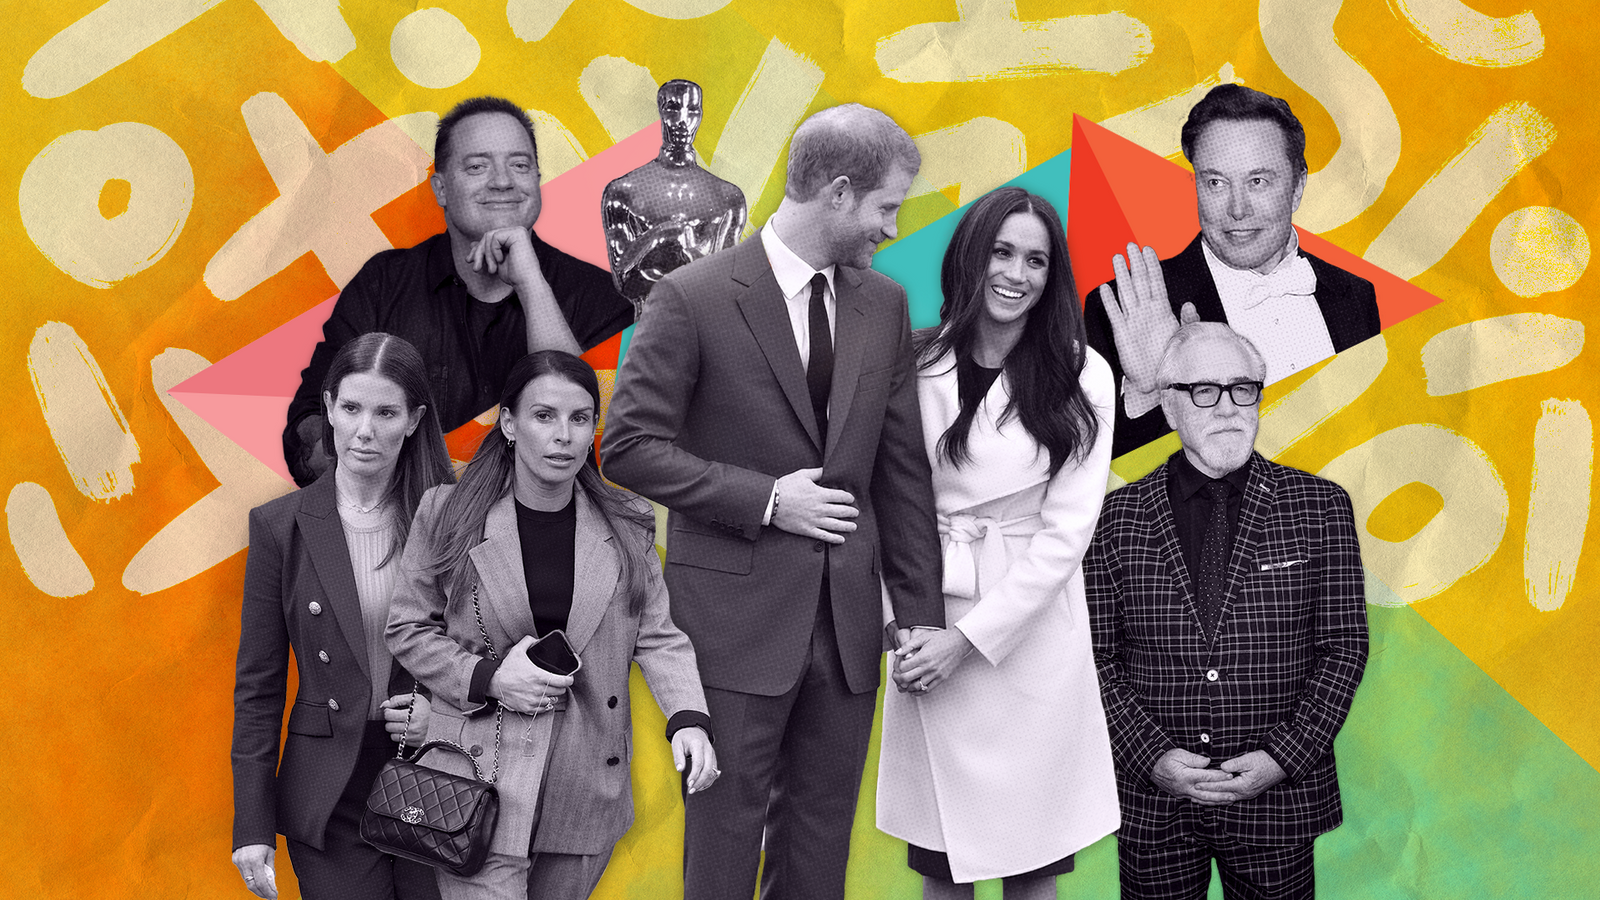 Entertainment predictions for 2023: Star court appearances, more royal influence and Oscar buzz | The Art News